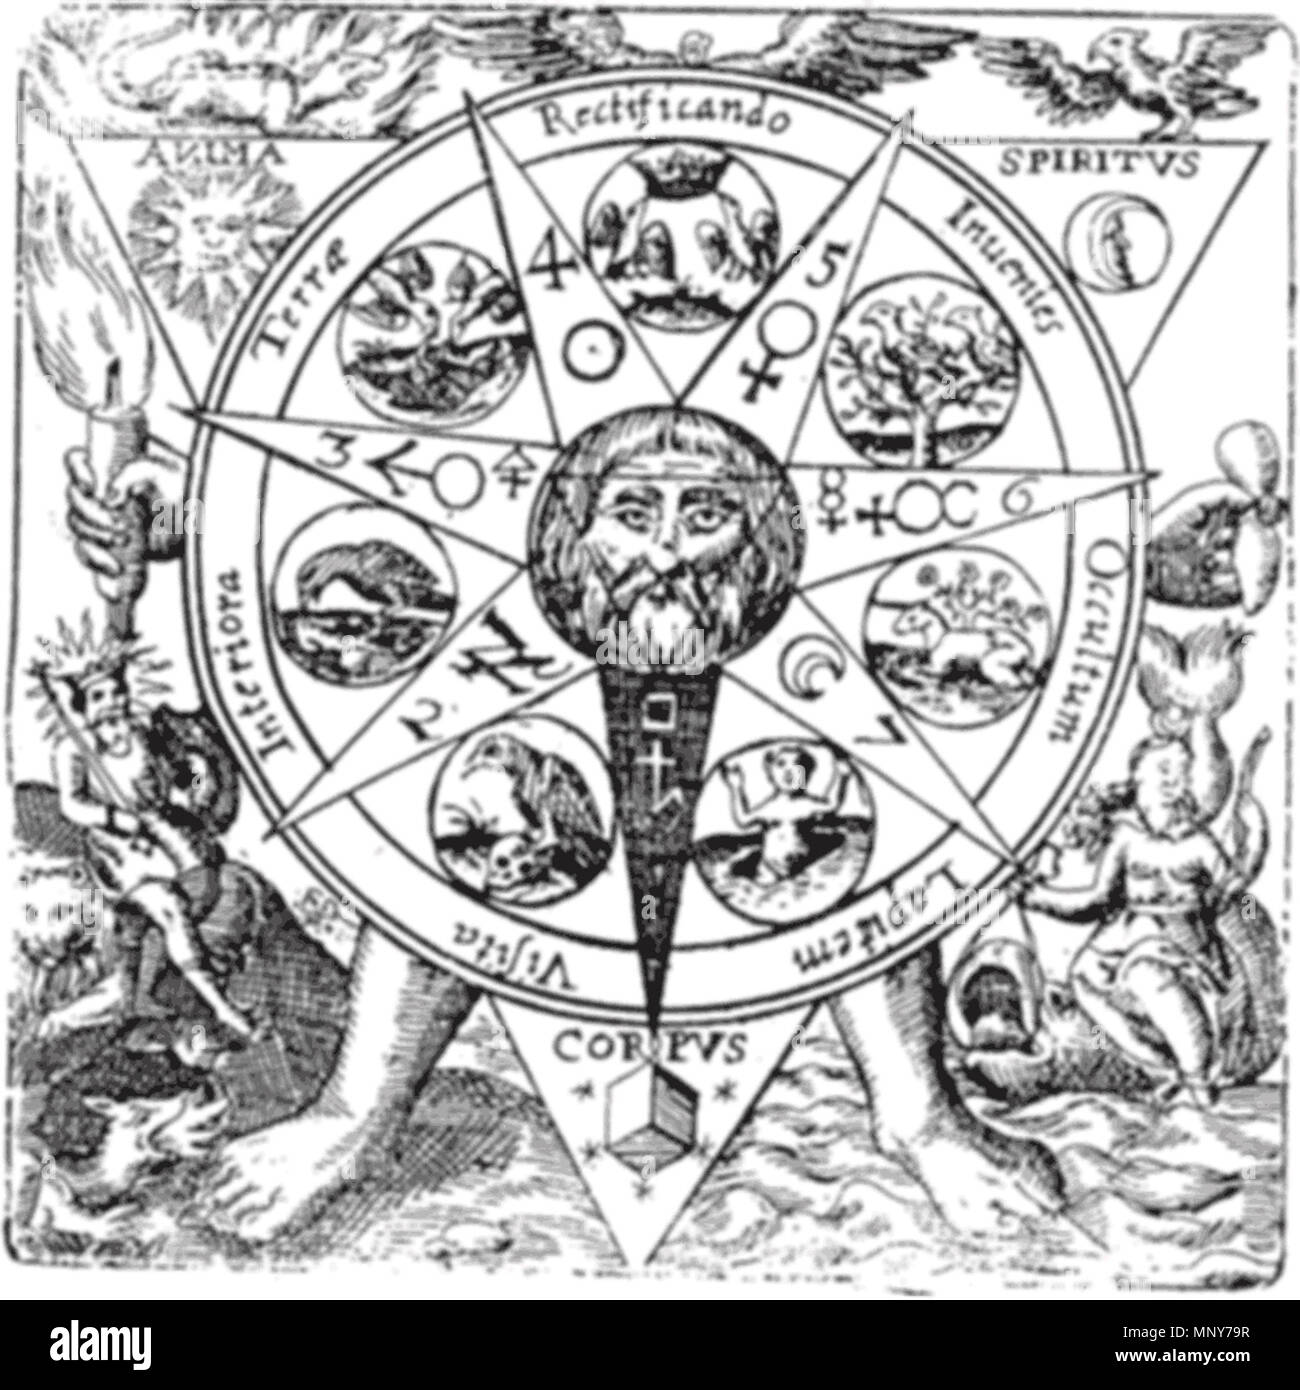 English: Anagrammatical, alchemical figure representing 'Vitriol' here  taken to stand for Visita interiora terrae; rectificando invenies occultum  lapidem ('Visit the interior parts of the earth; by rectification you will  find the